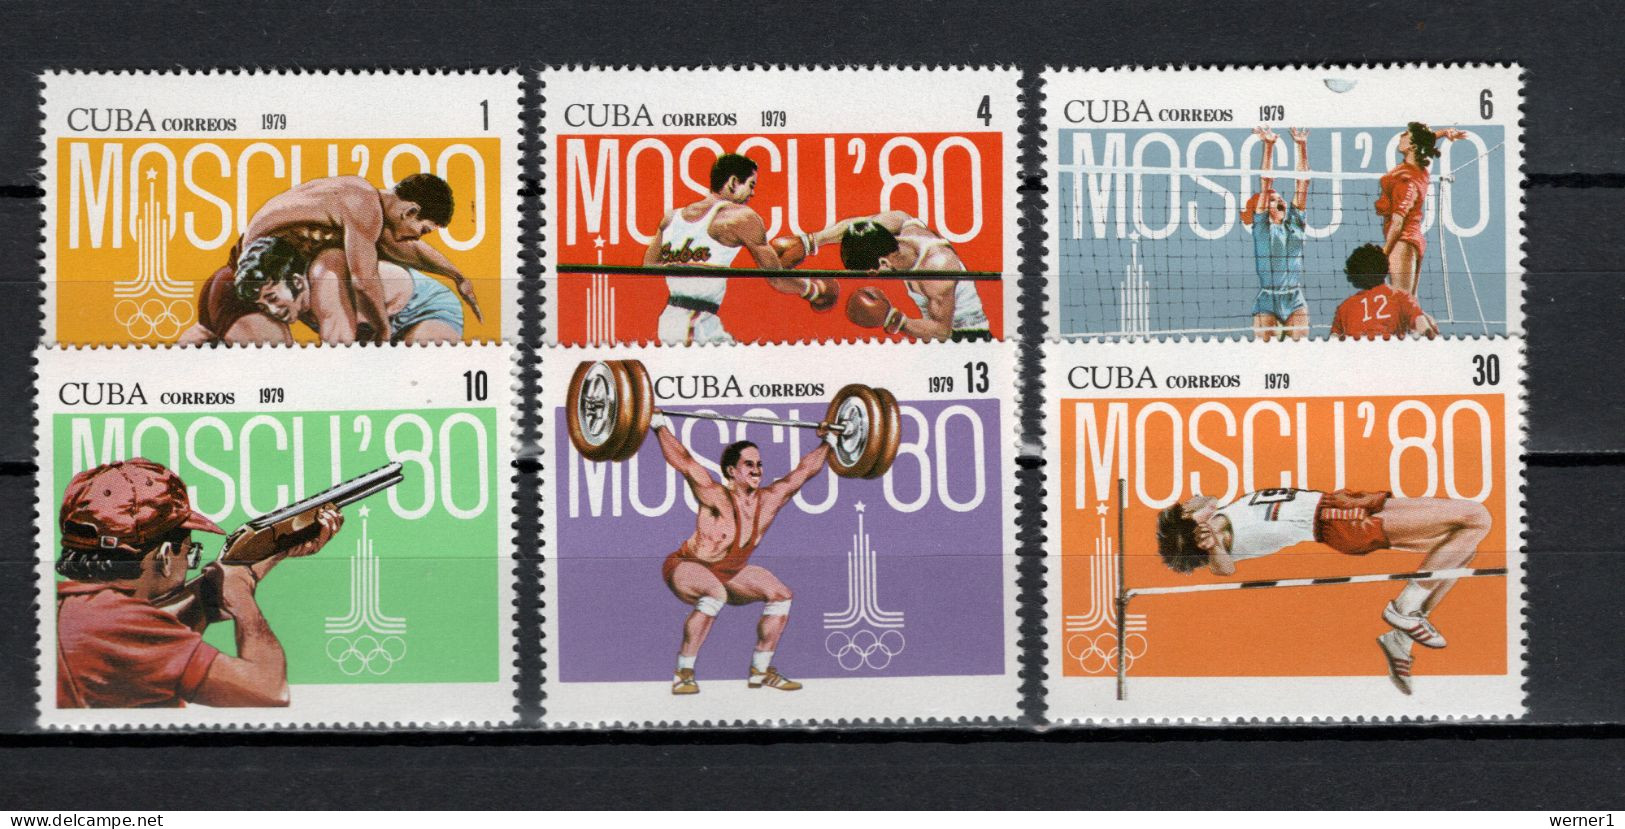 Cuba 1979 Olympic Games Moscow, Wrestling, Boxing, Volleyball, Shooting Etc. Set Of 6 MNH - Verano 1980: Moscu